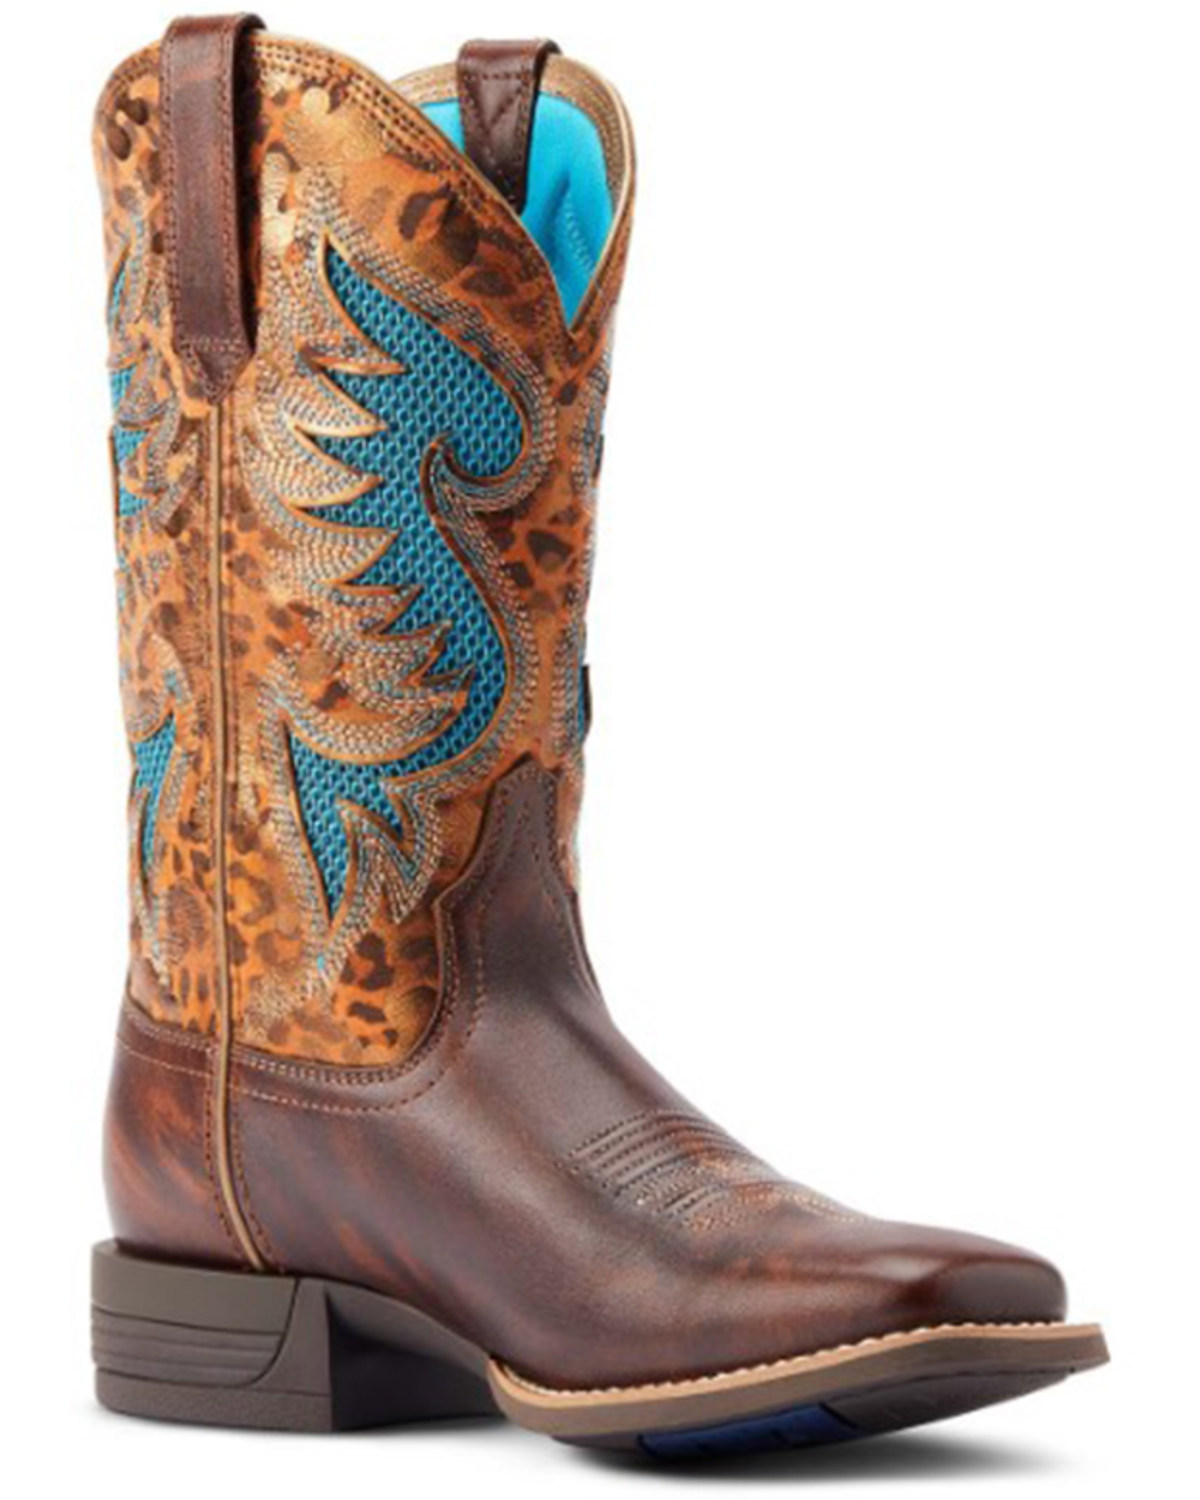 Ariat Women's Pinto VentTEK Western Performance Boots - Broad Square Toe